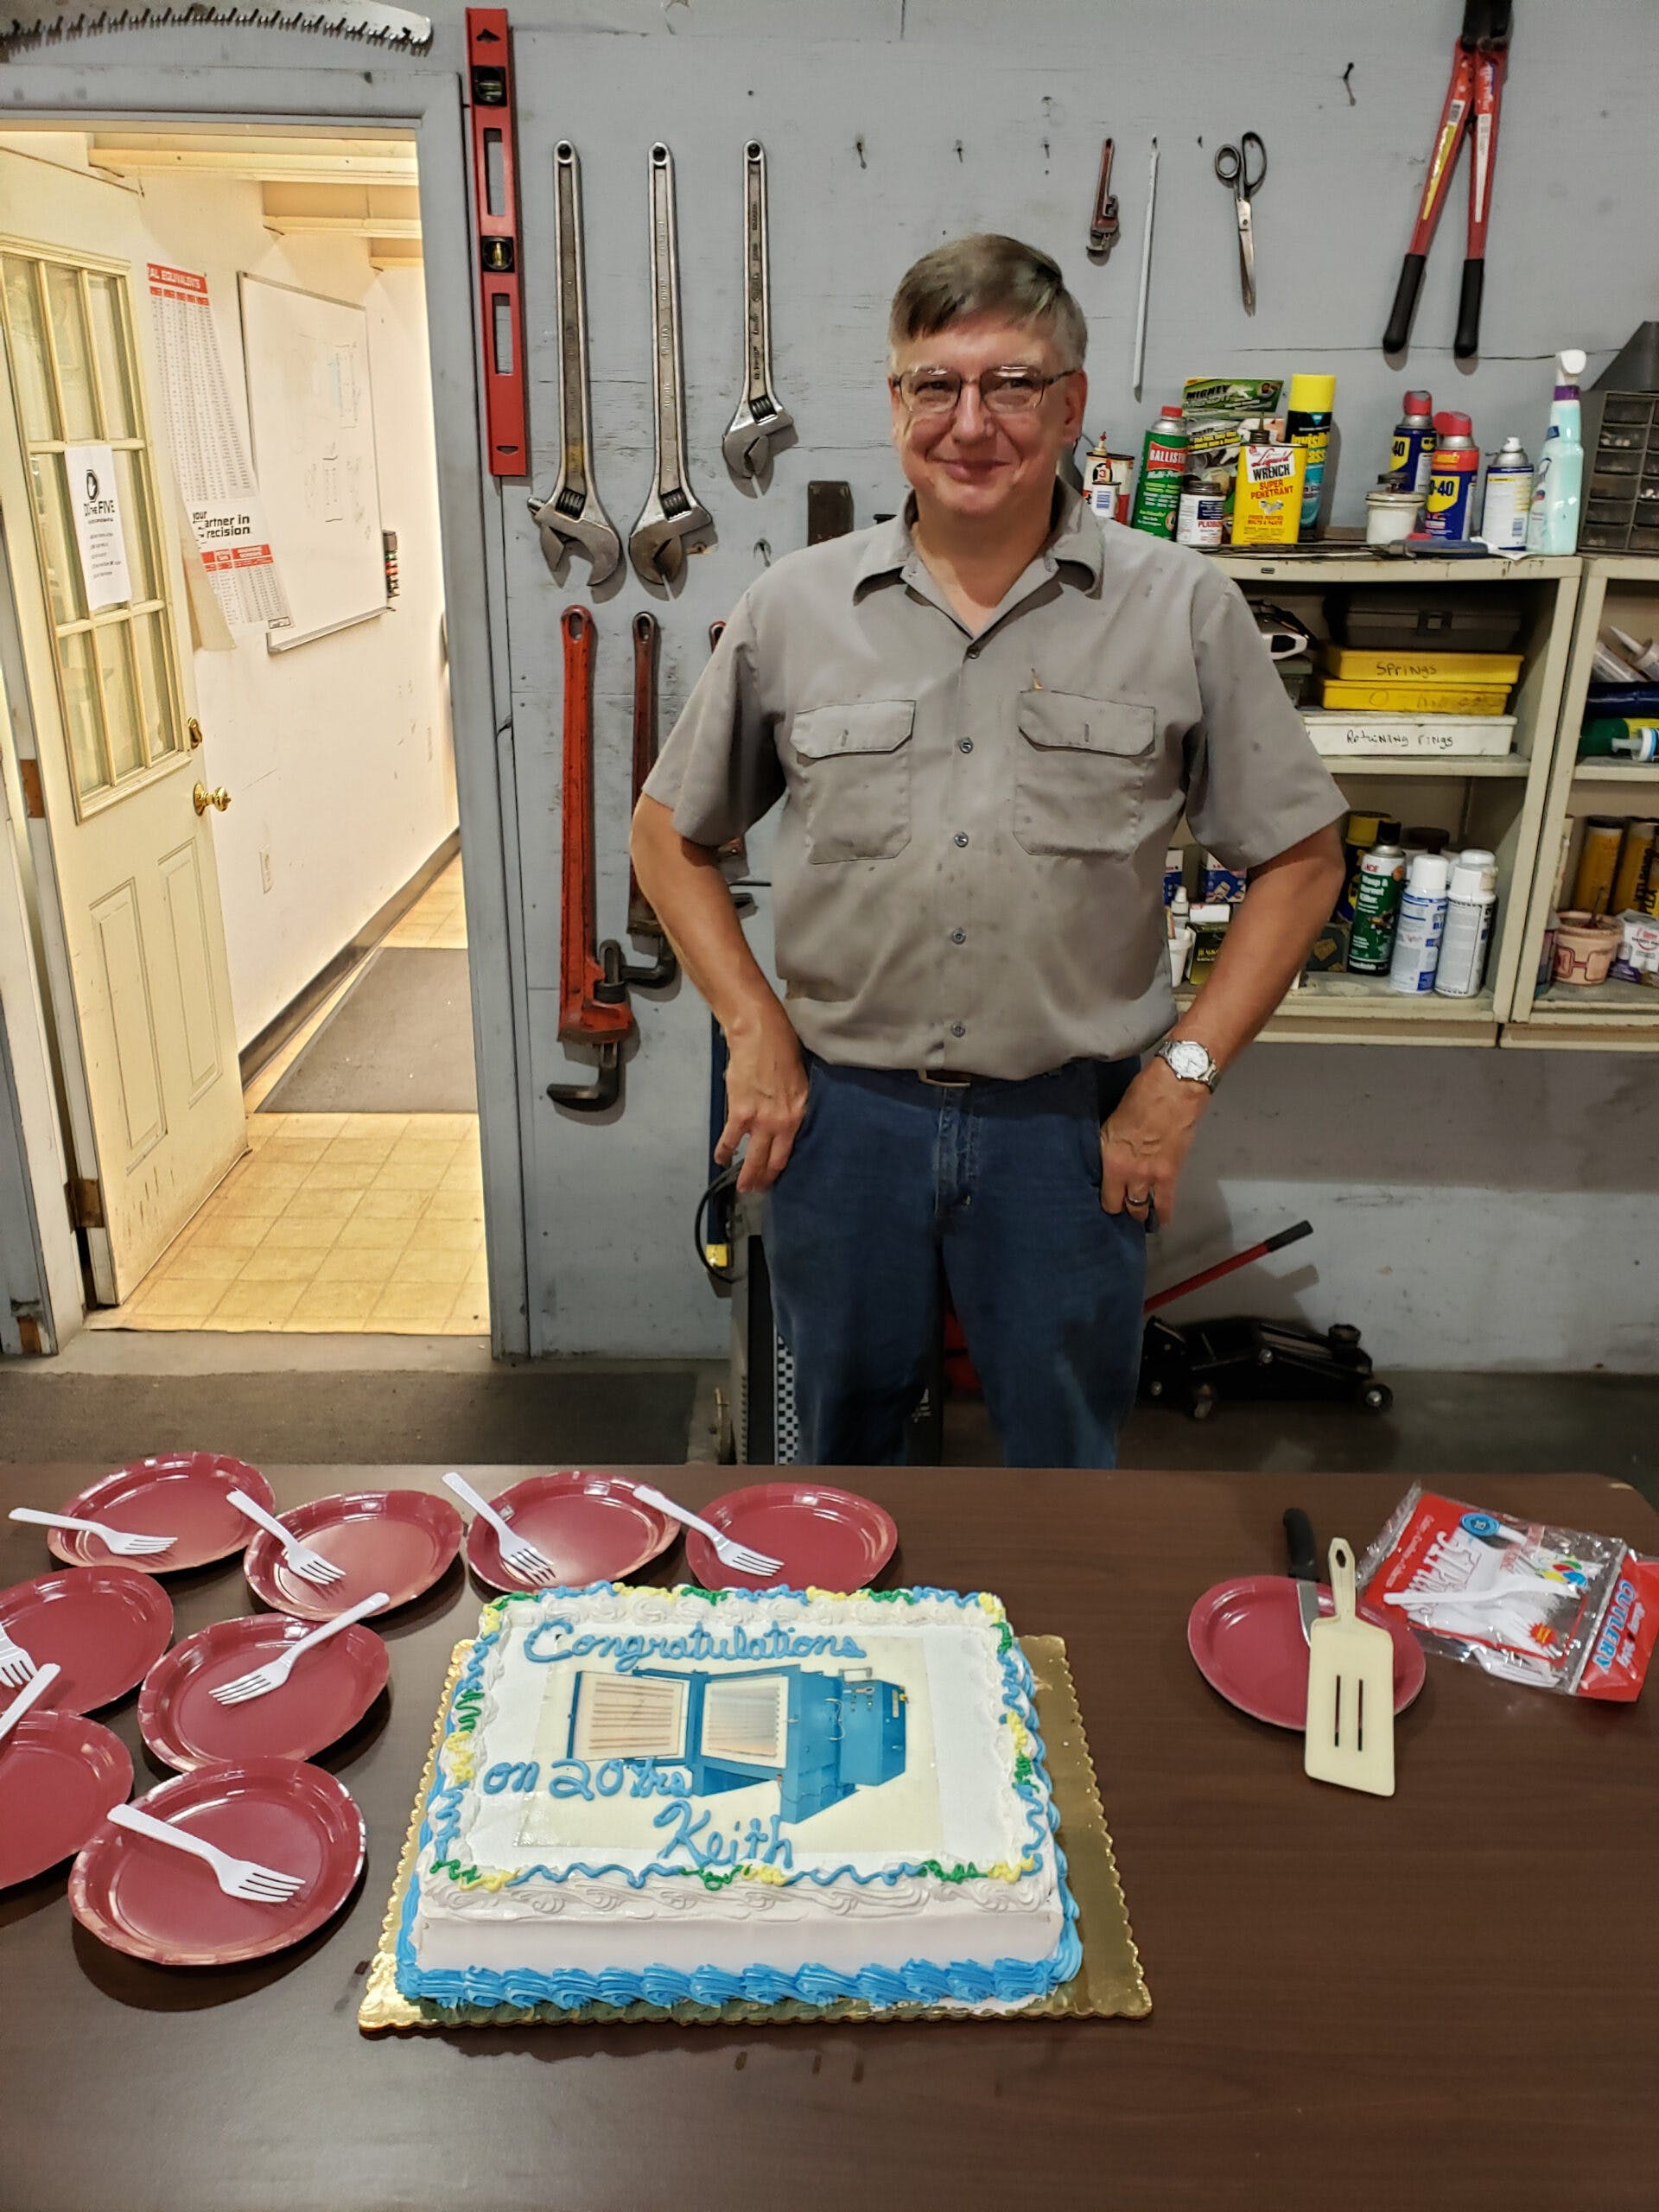 Master Furnace Assembler Keith Bailey marked 20 years with L&L